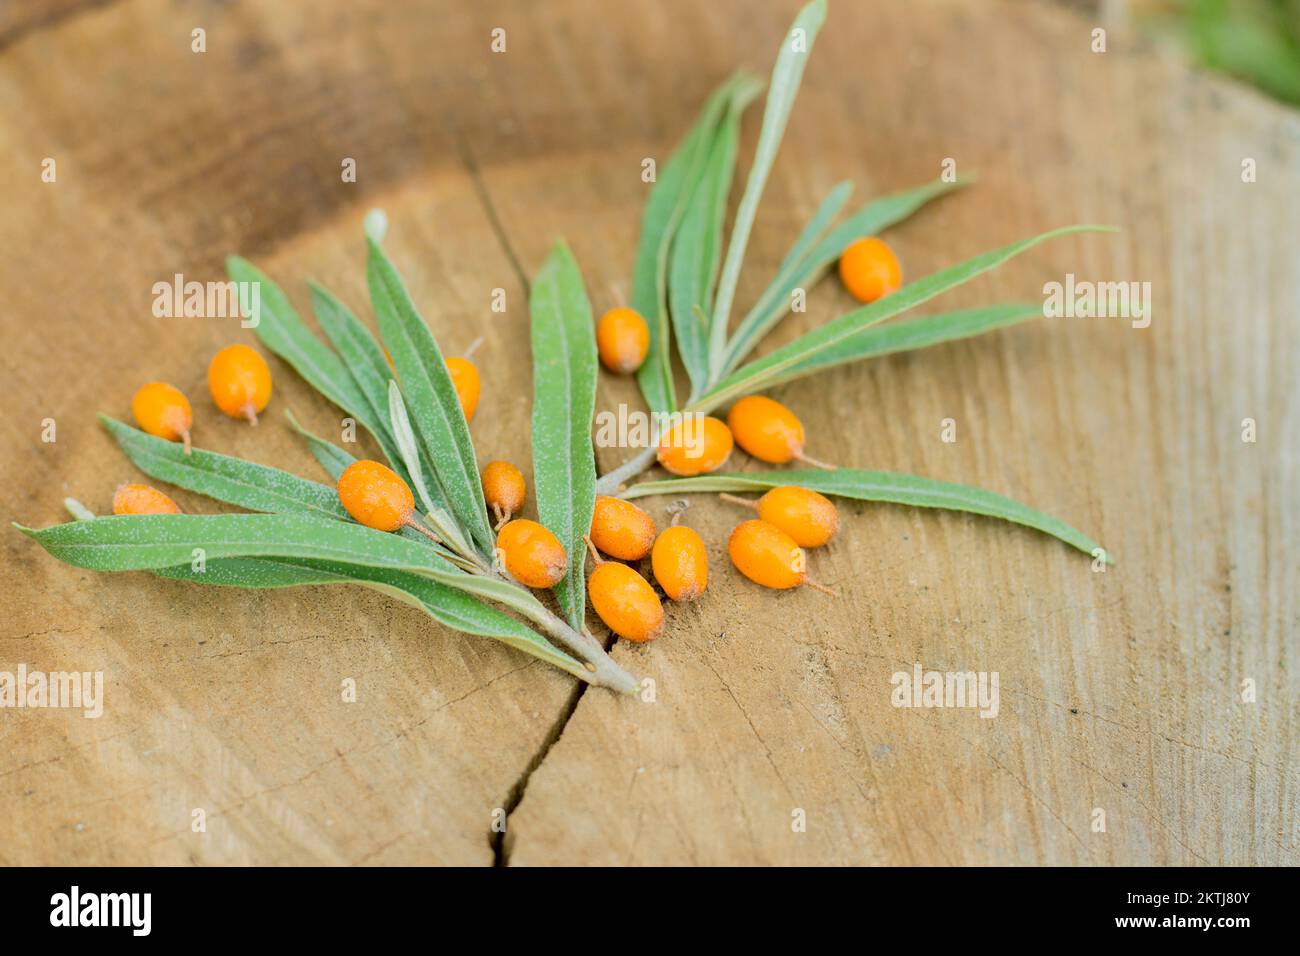 Seaberry (Hippophae) genus of sea buckthorns, orange yellow berries and silvery-green leaves on wooden board Stock Photo